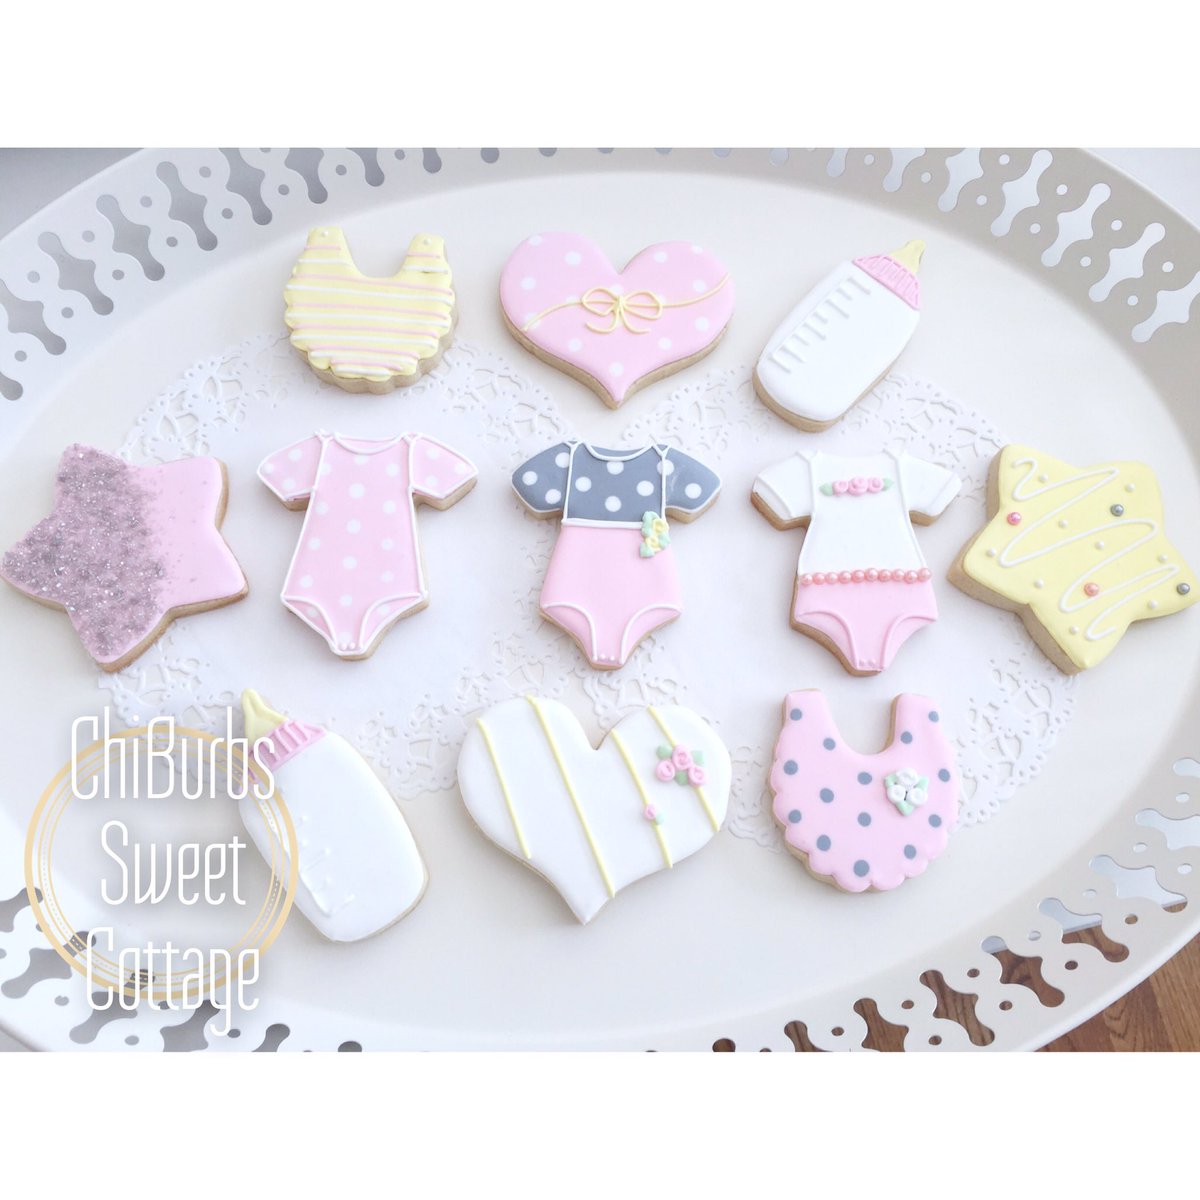 Cookie decoration for baby Shower 新しいレッスン用のサンプルクッキー#ベビーシャワー 用のクッキー。#wiltoncakes #wilton #富澤商店 #コッタ #クオカ #アイシングクッキー #cookiedecoration #cookie